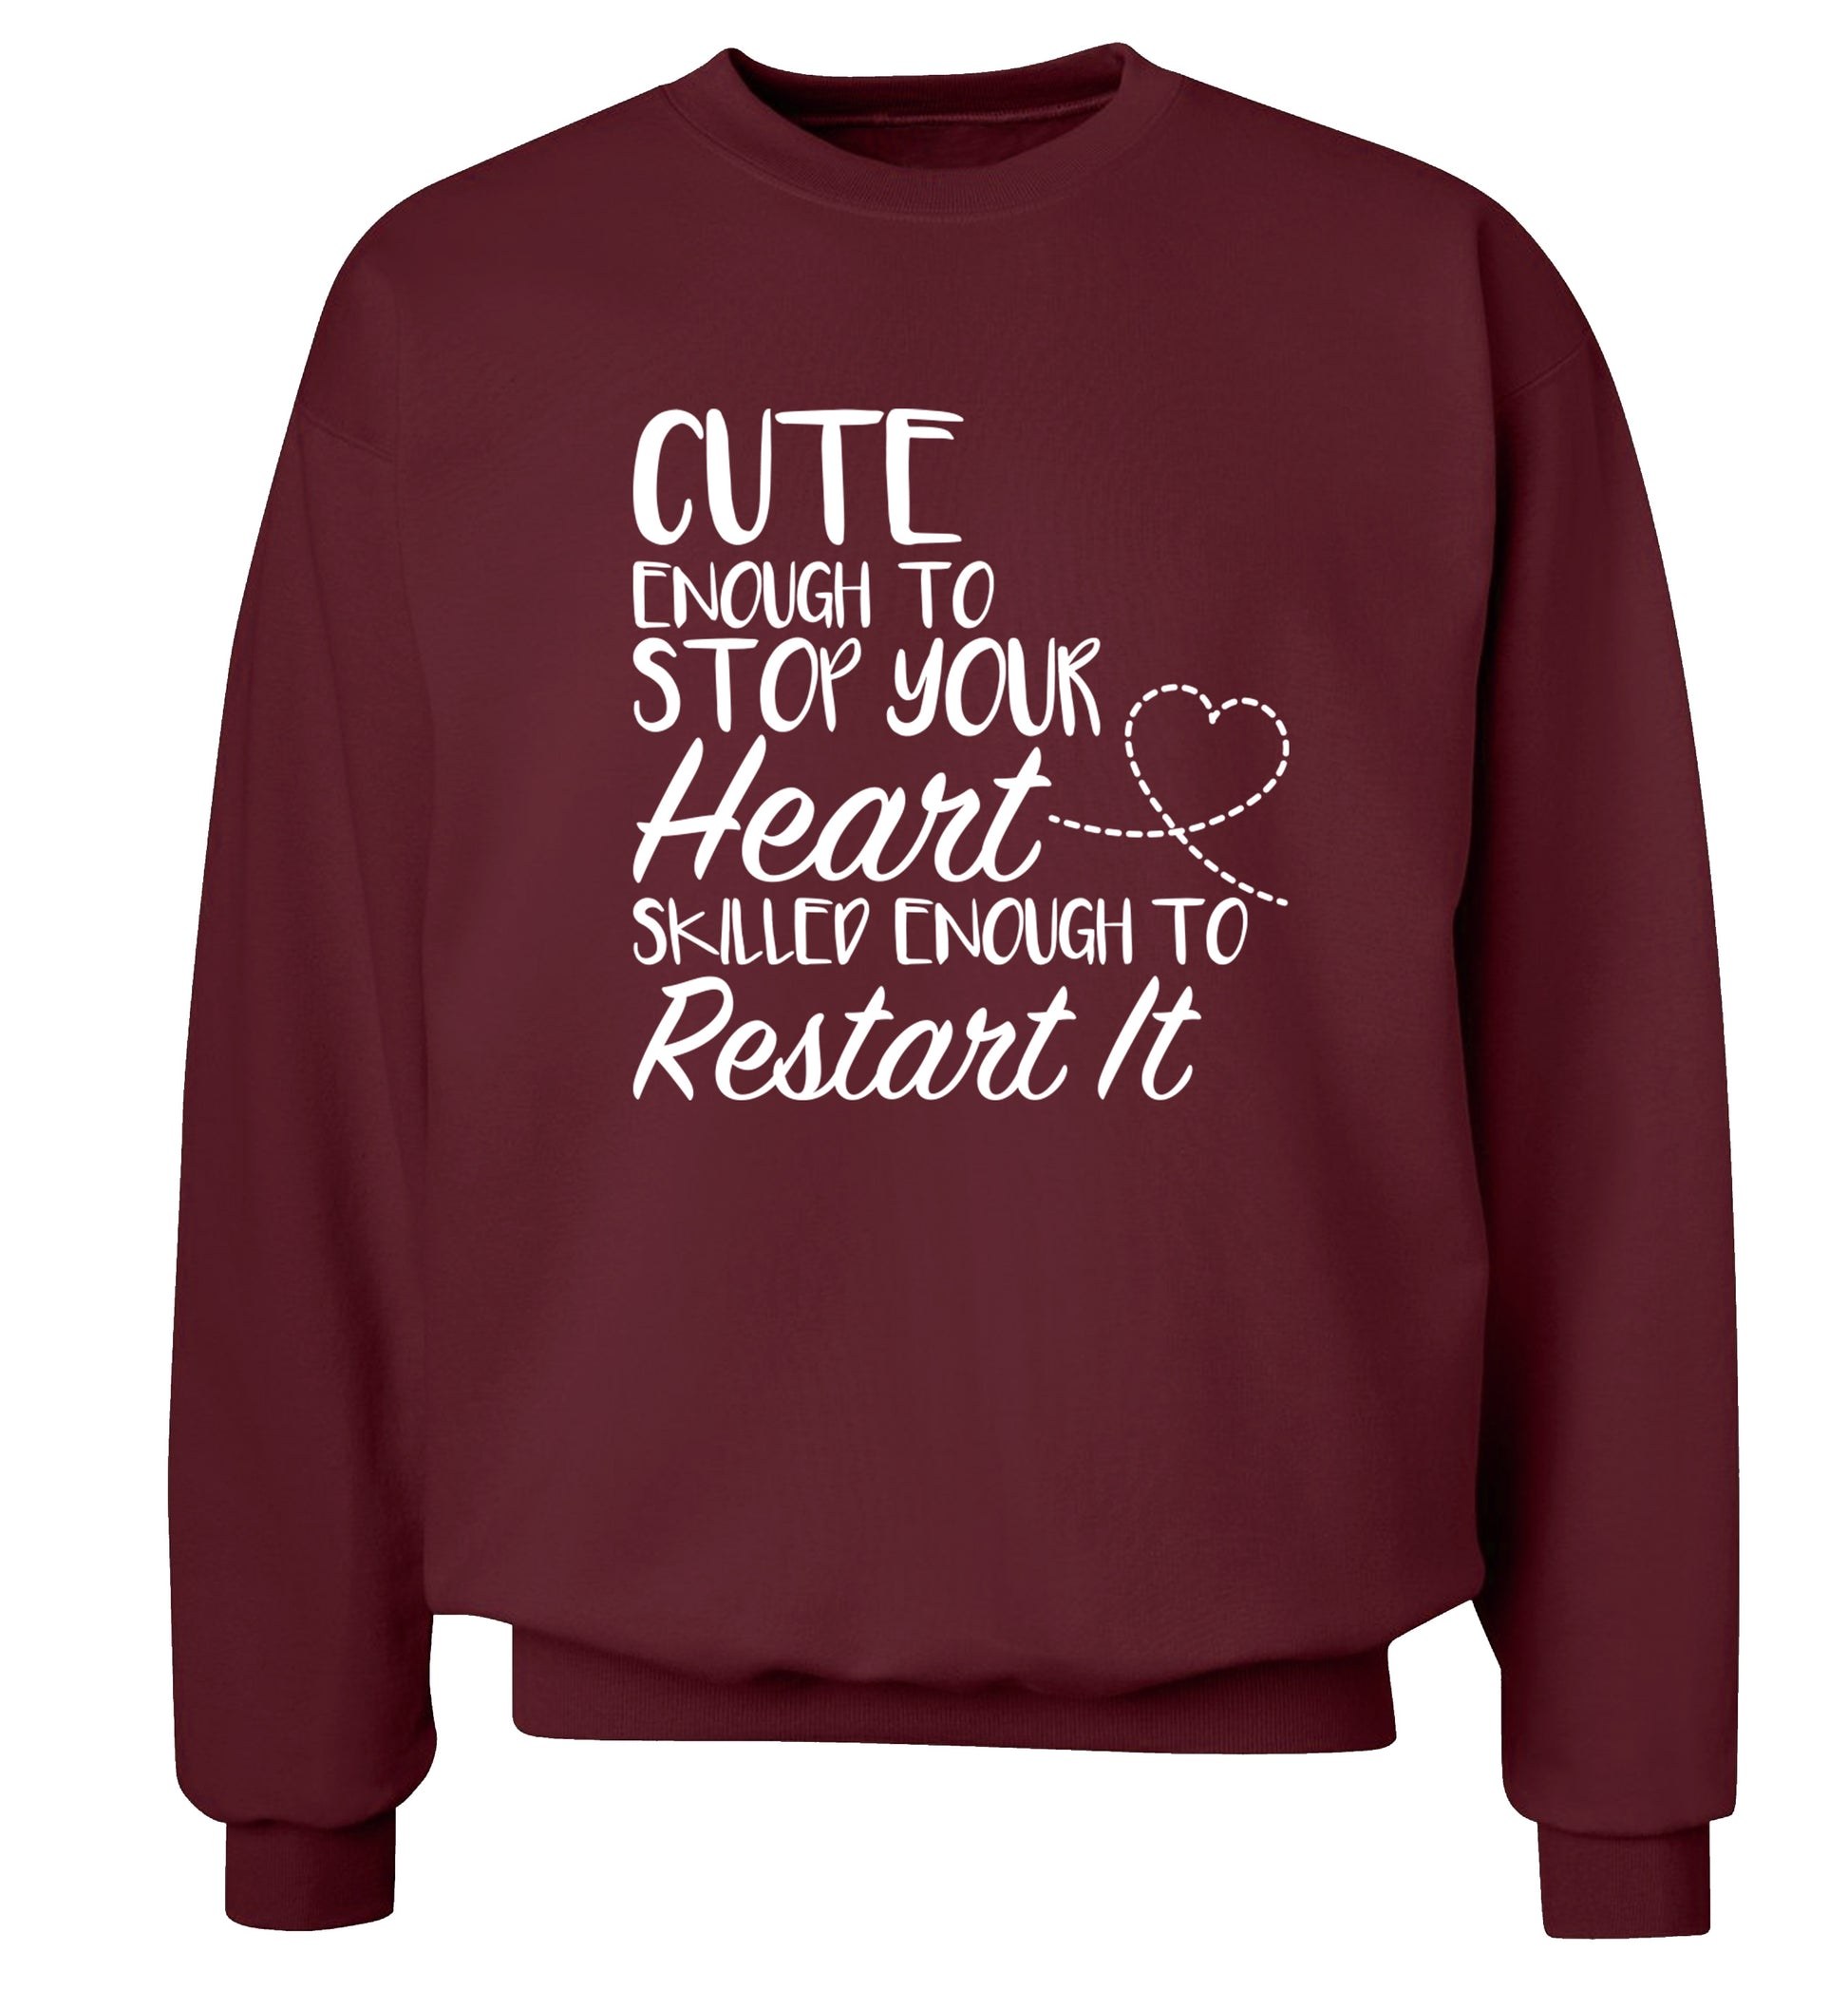 Cute enough to stop your heart skilled enough to restart it Adult's unisex maroon Sweater 2XL